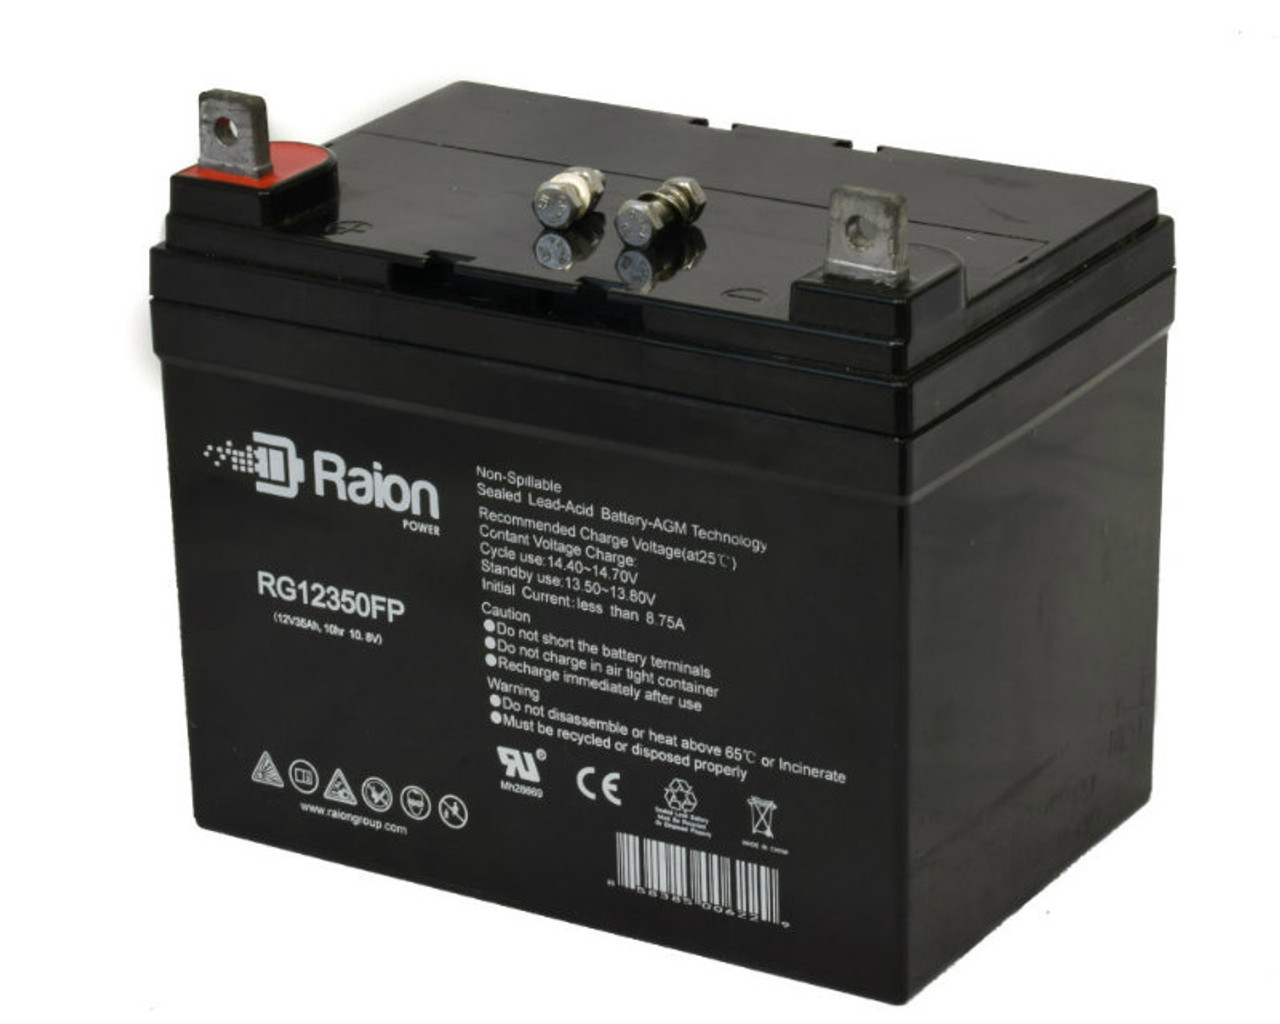 Raion Power Replacement 12V 35Ah RG12350FP Mobility Scooter Battery for IMC Heartway Rumba SF P-4F